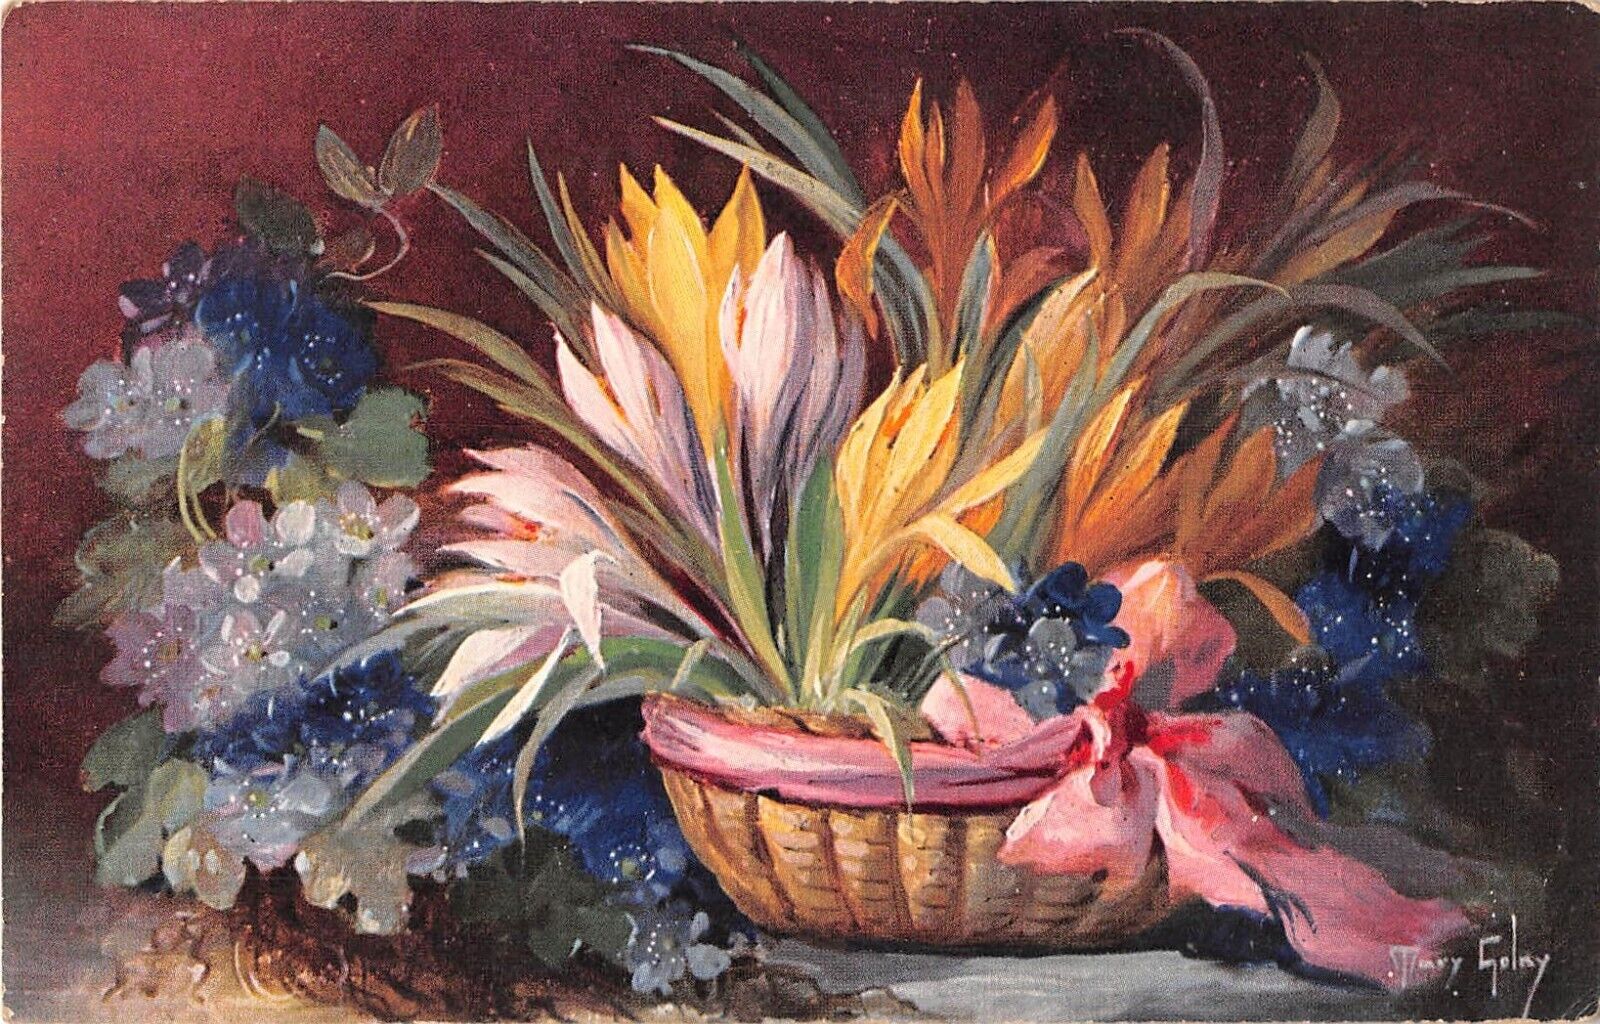 Colorful Crocus & Other Flowers in a Planter-Old PC Signed Artist Mary Golay